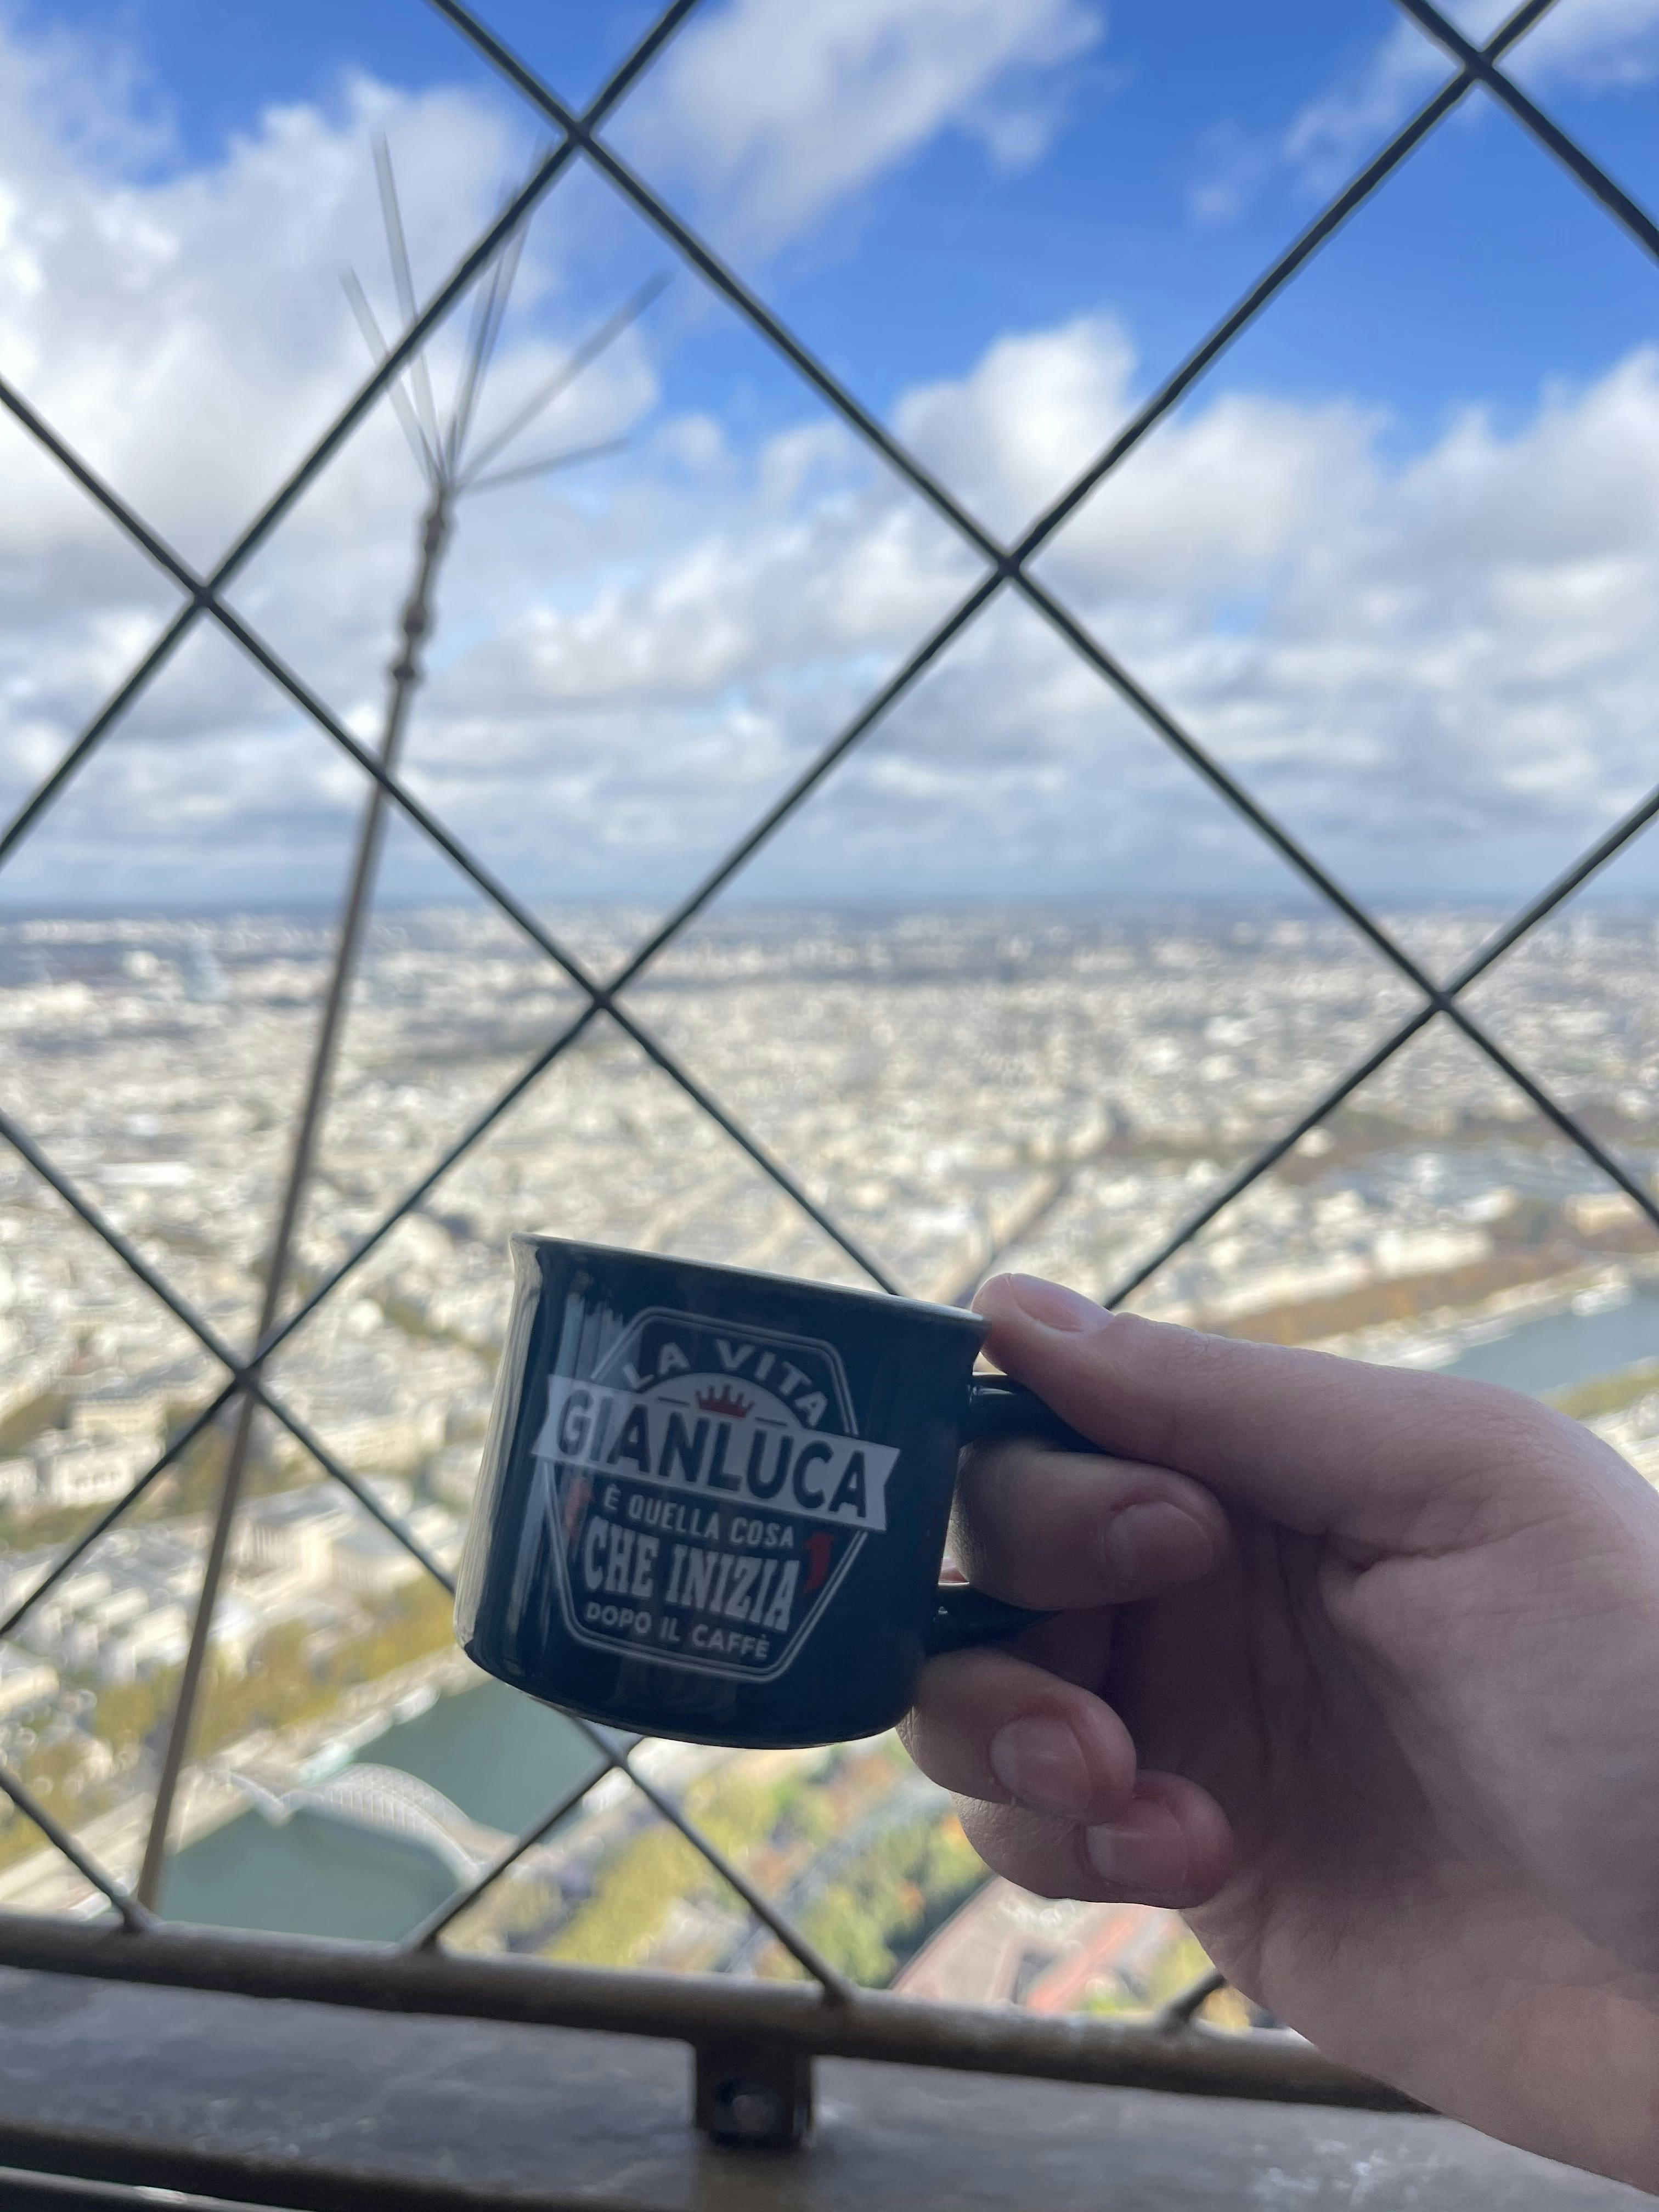 Luka’s favorite cup on the world tour: a view from the Eiffel Tower